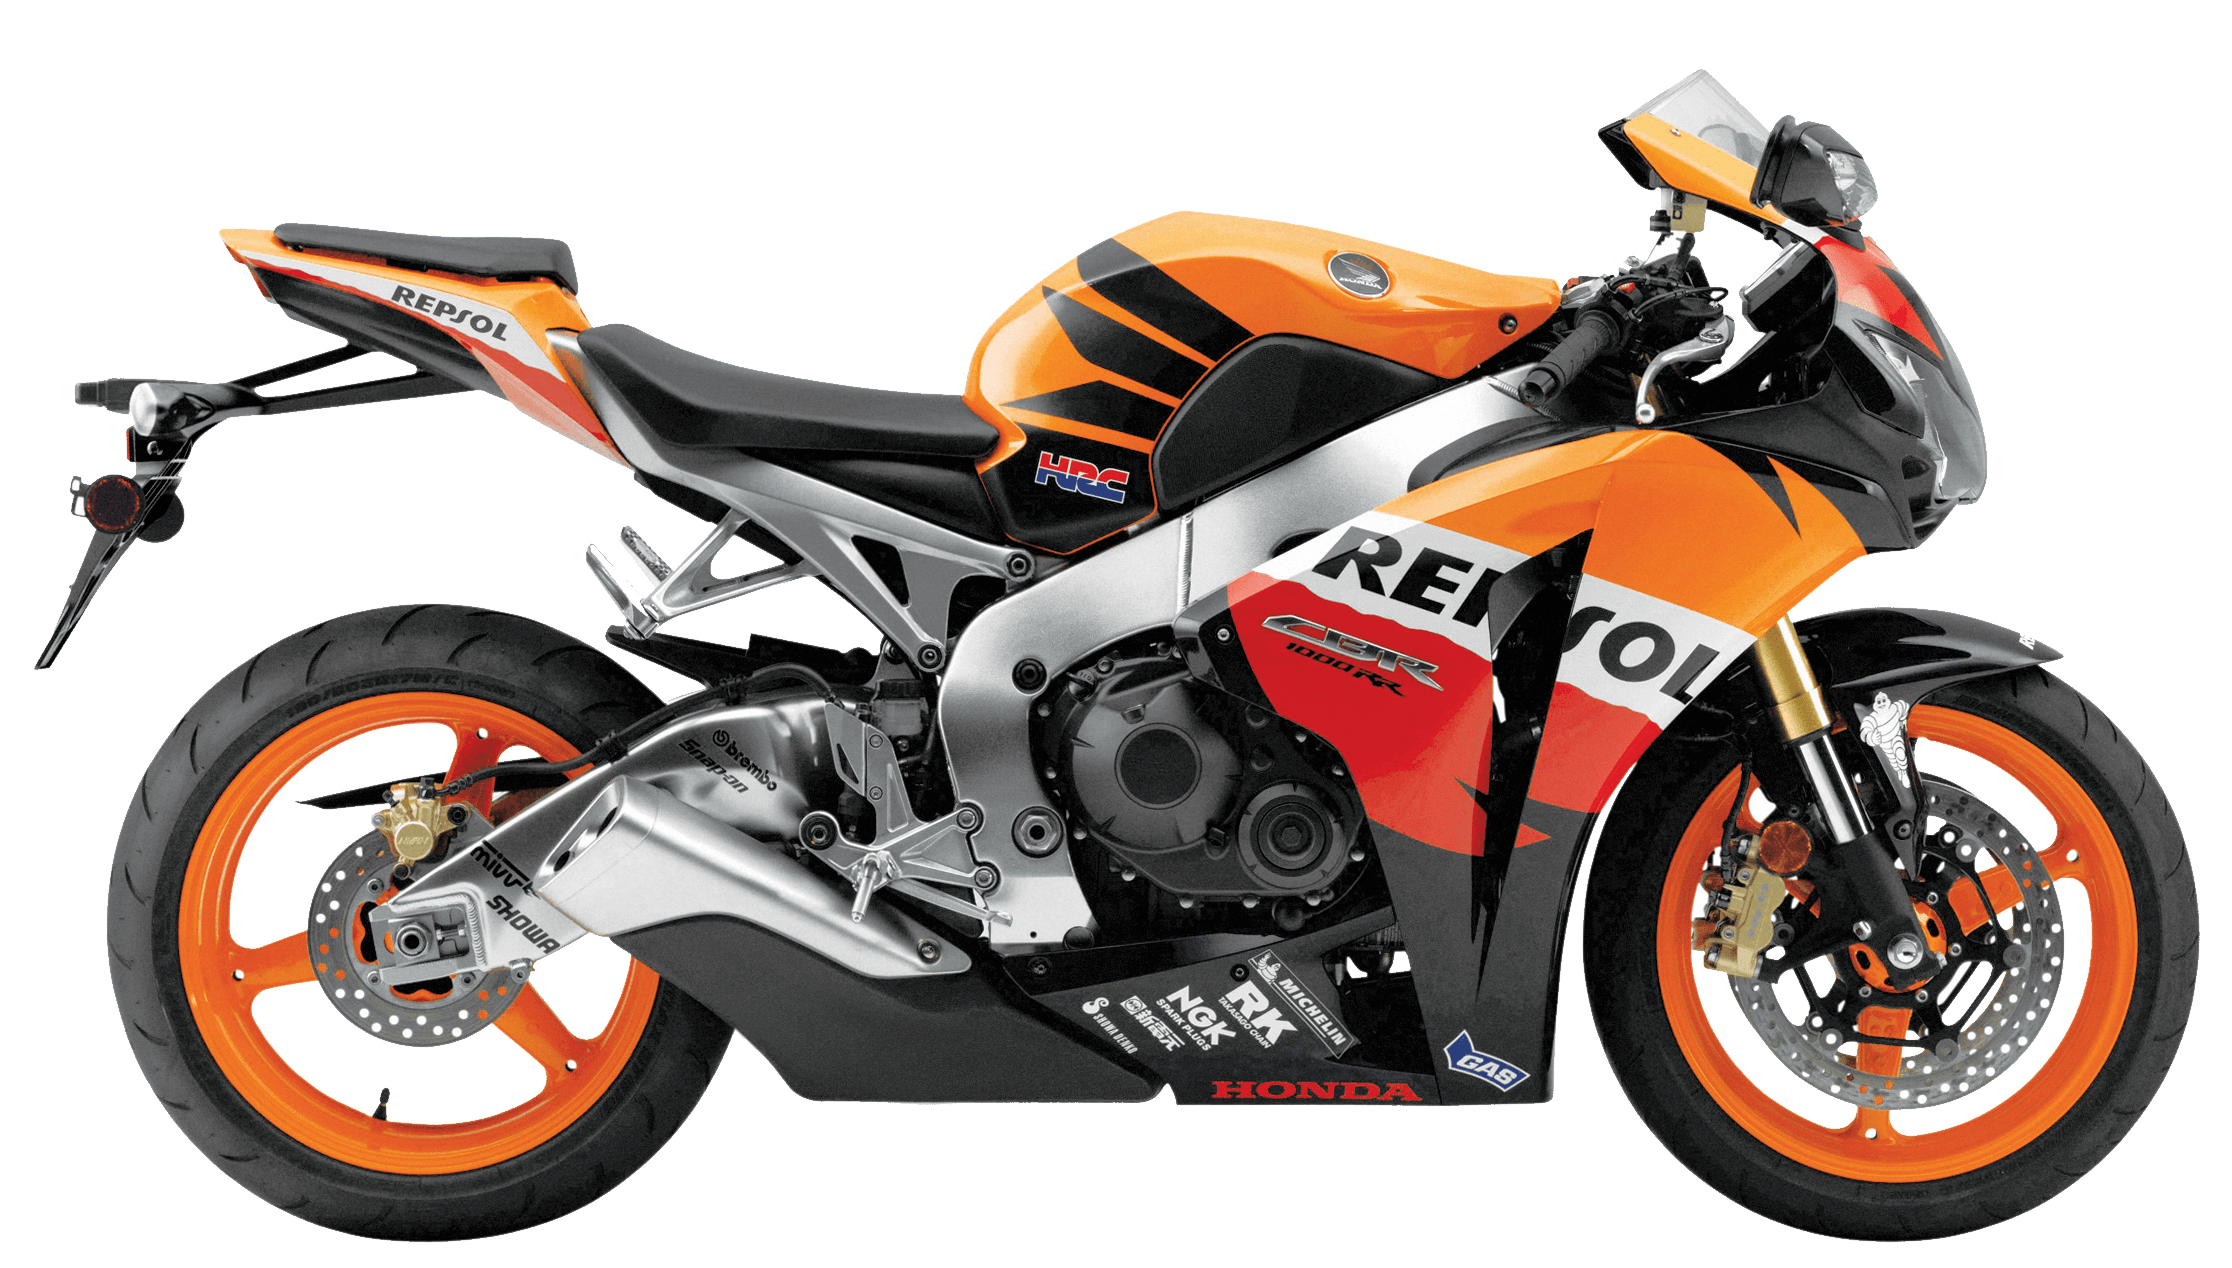 Download Moto Png Image Motorcycle Png Picture Download HQ.